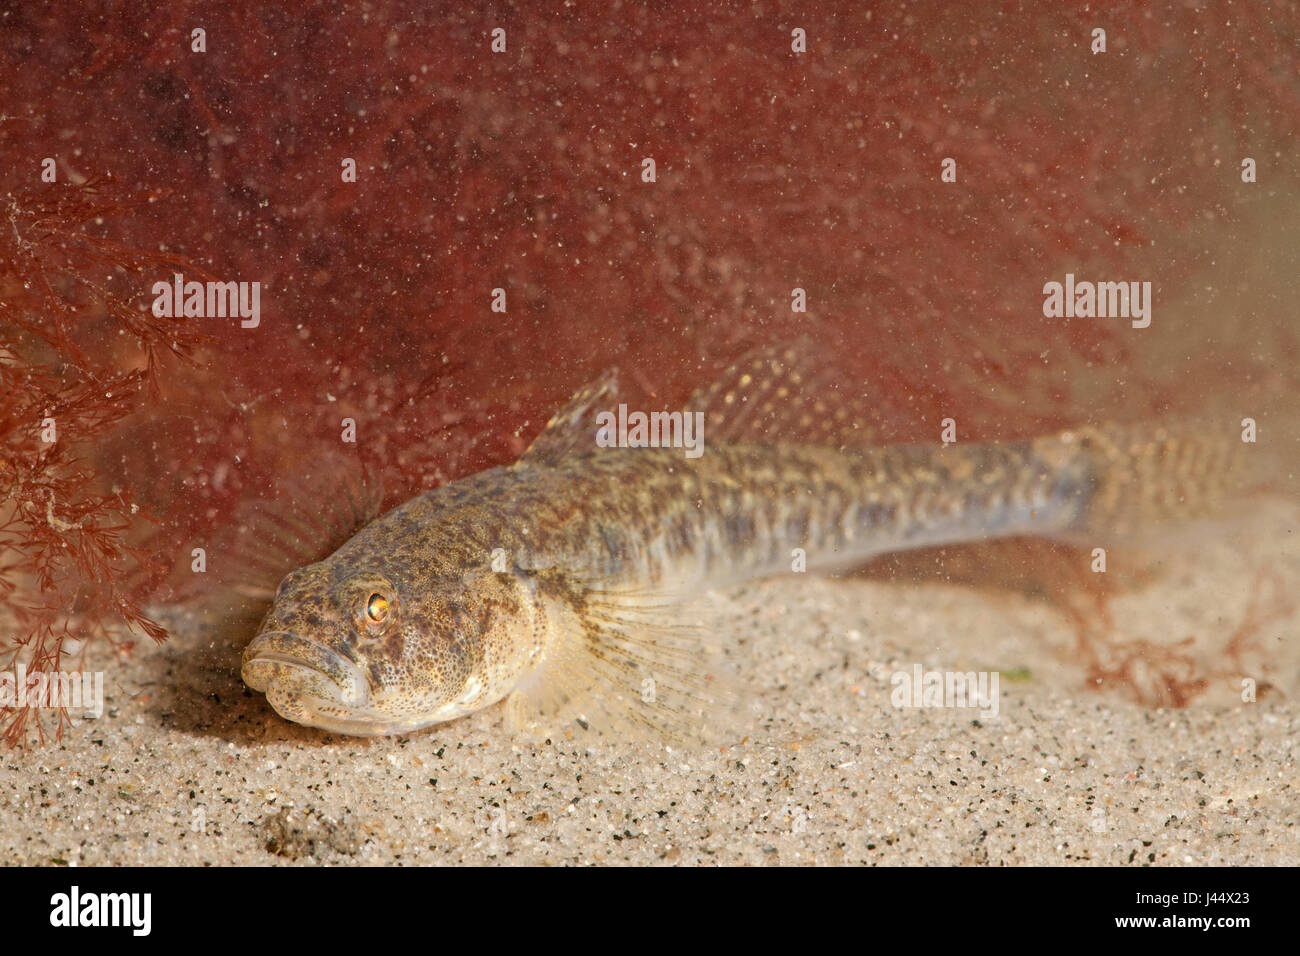 photo of a common goby on sand with red plants in the background Stock Photo